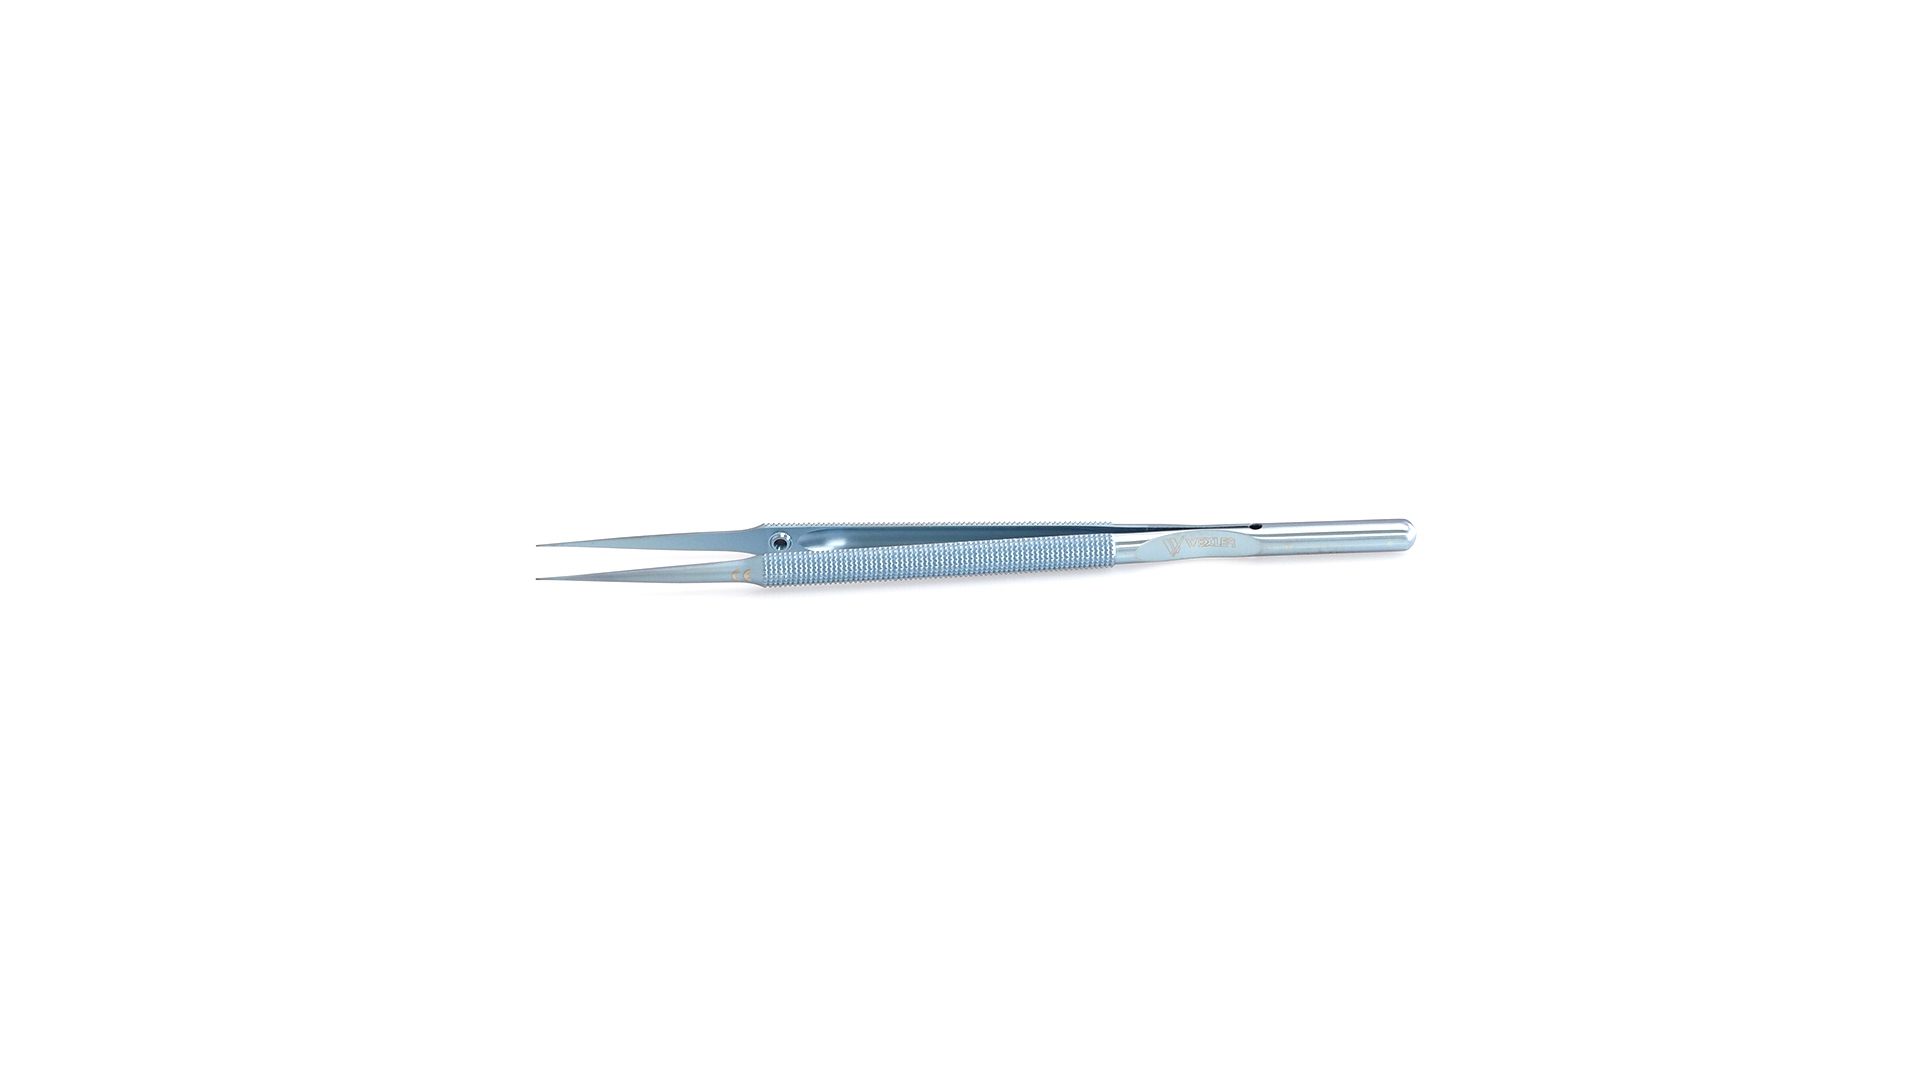 Micro Forceps - Straight 0.4mm tips